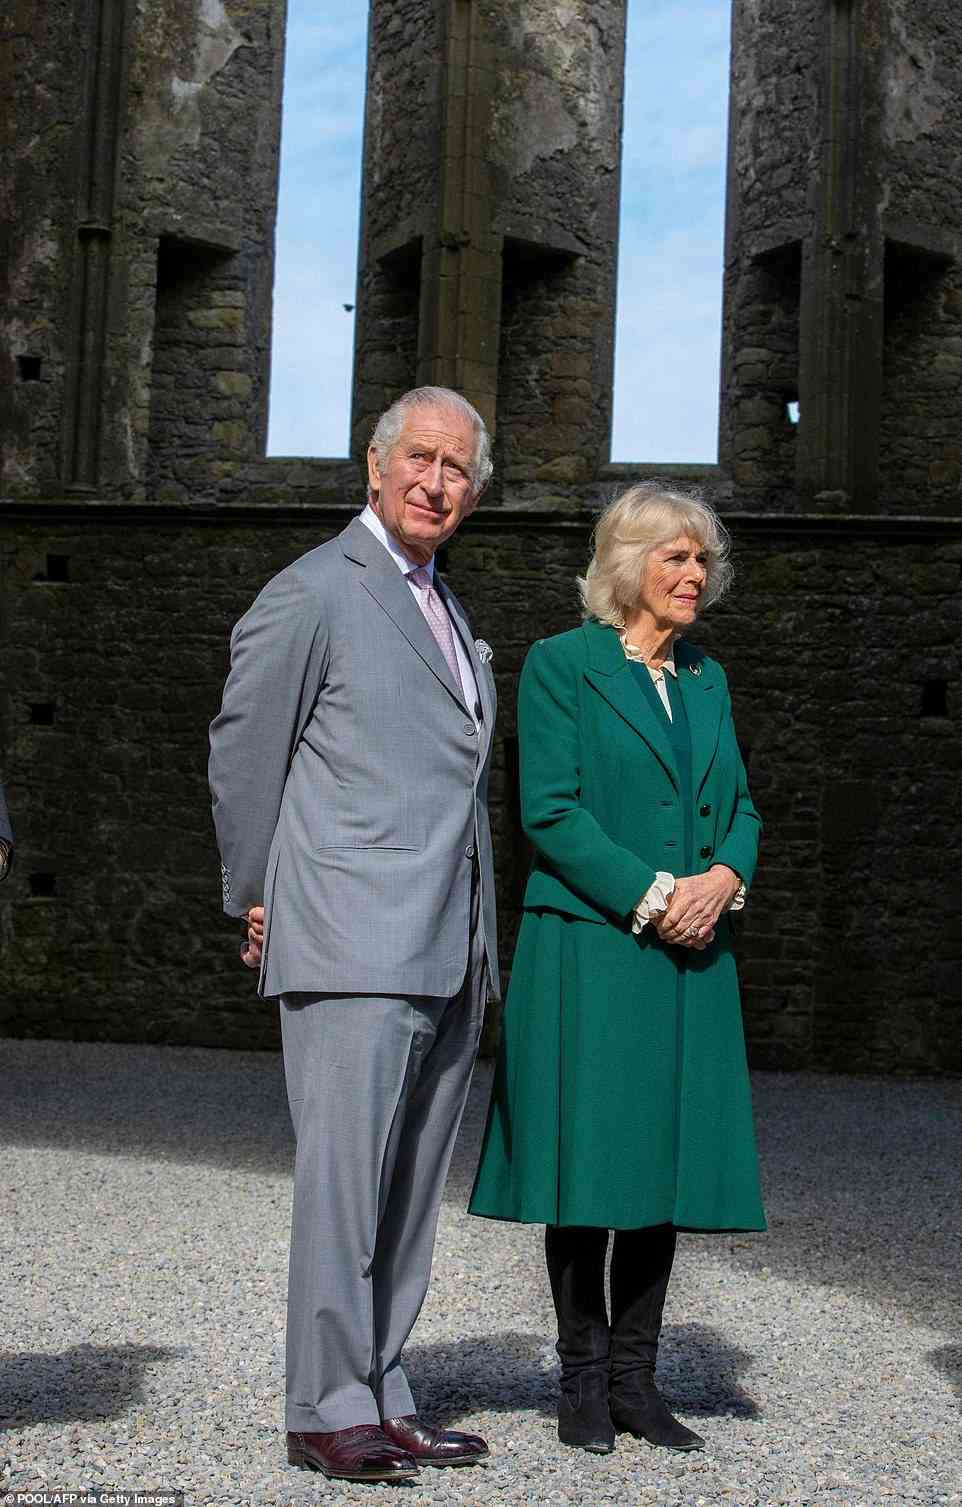 Prince of Wales and Duchess of Cornwall pose for photographs at the ancient site of the rock of Cashel in Co Tipperary